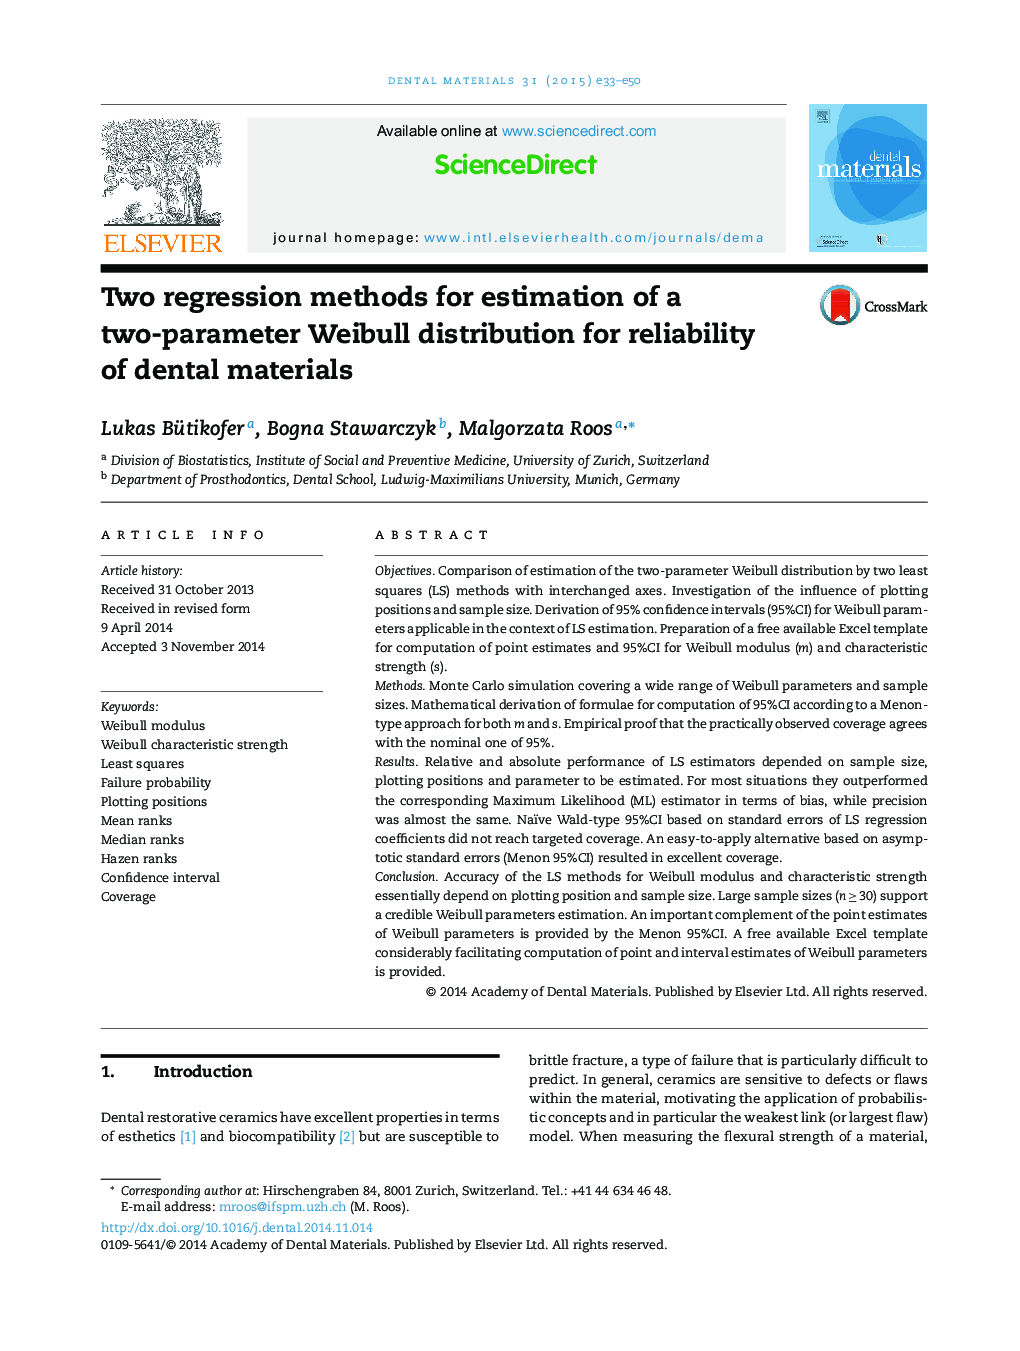 Two regression methods for estimation of a two-parameter Weibull distribution for reliability of dental materials